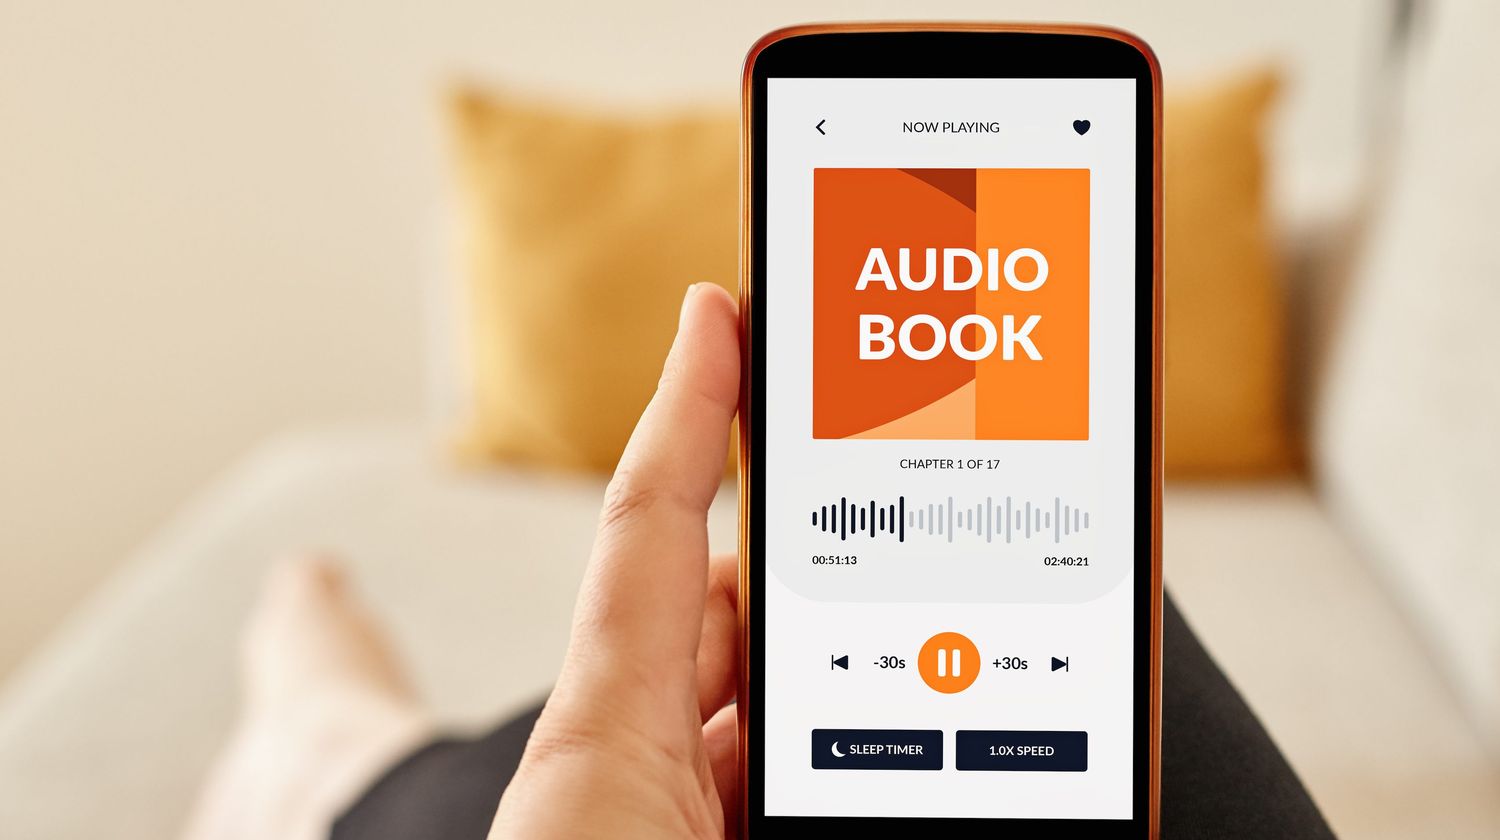 How To Prevent Losing Music And Books Purchased In Digital Format